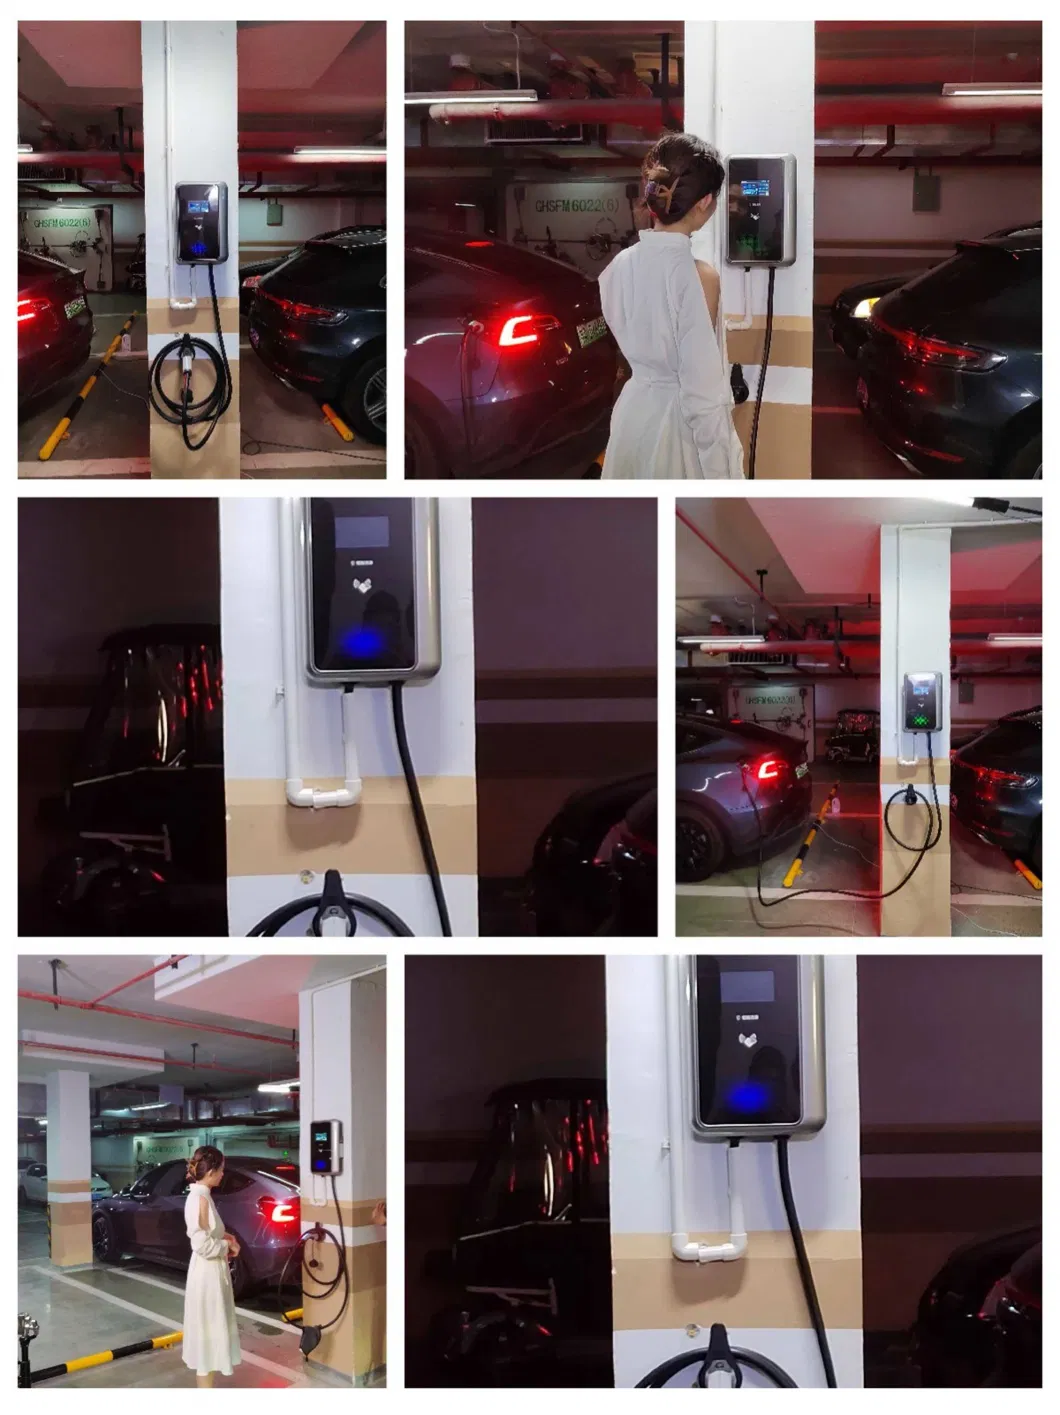 220V 11kw 48A New Design Car Battery Charger Wall Box Mode 3 Portable Electric Car Charging Station EV Charger with LCD Screen